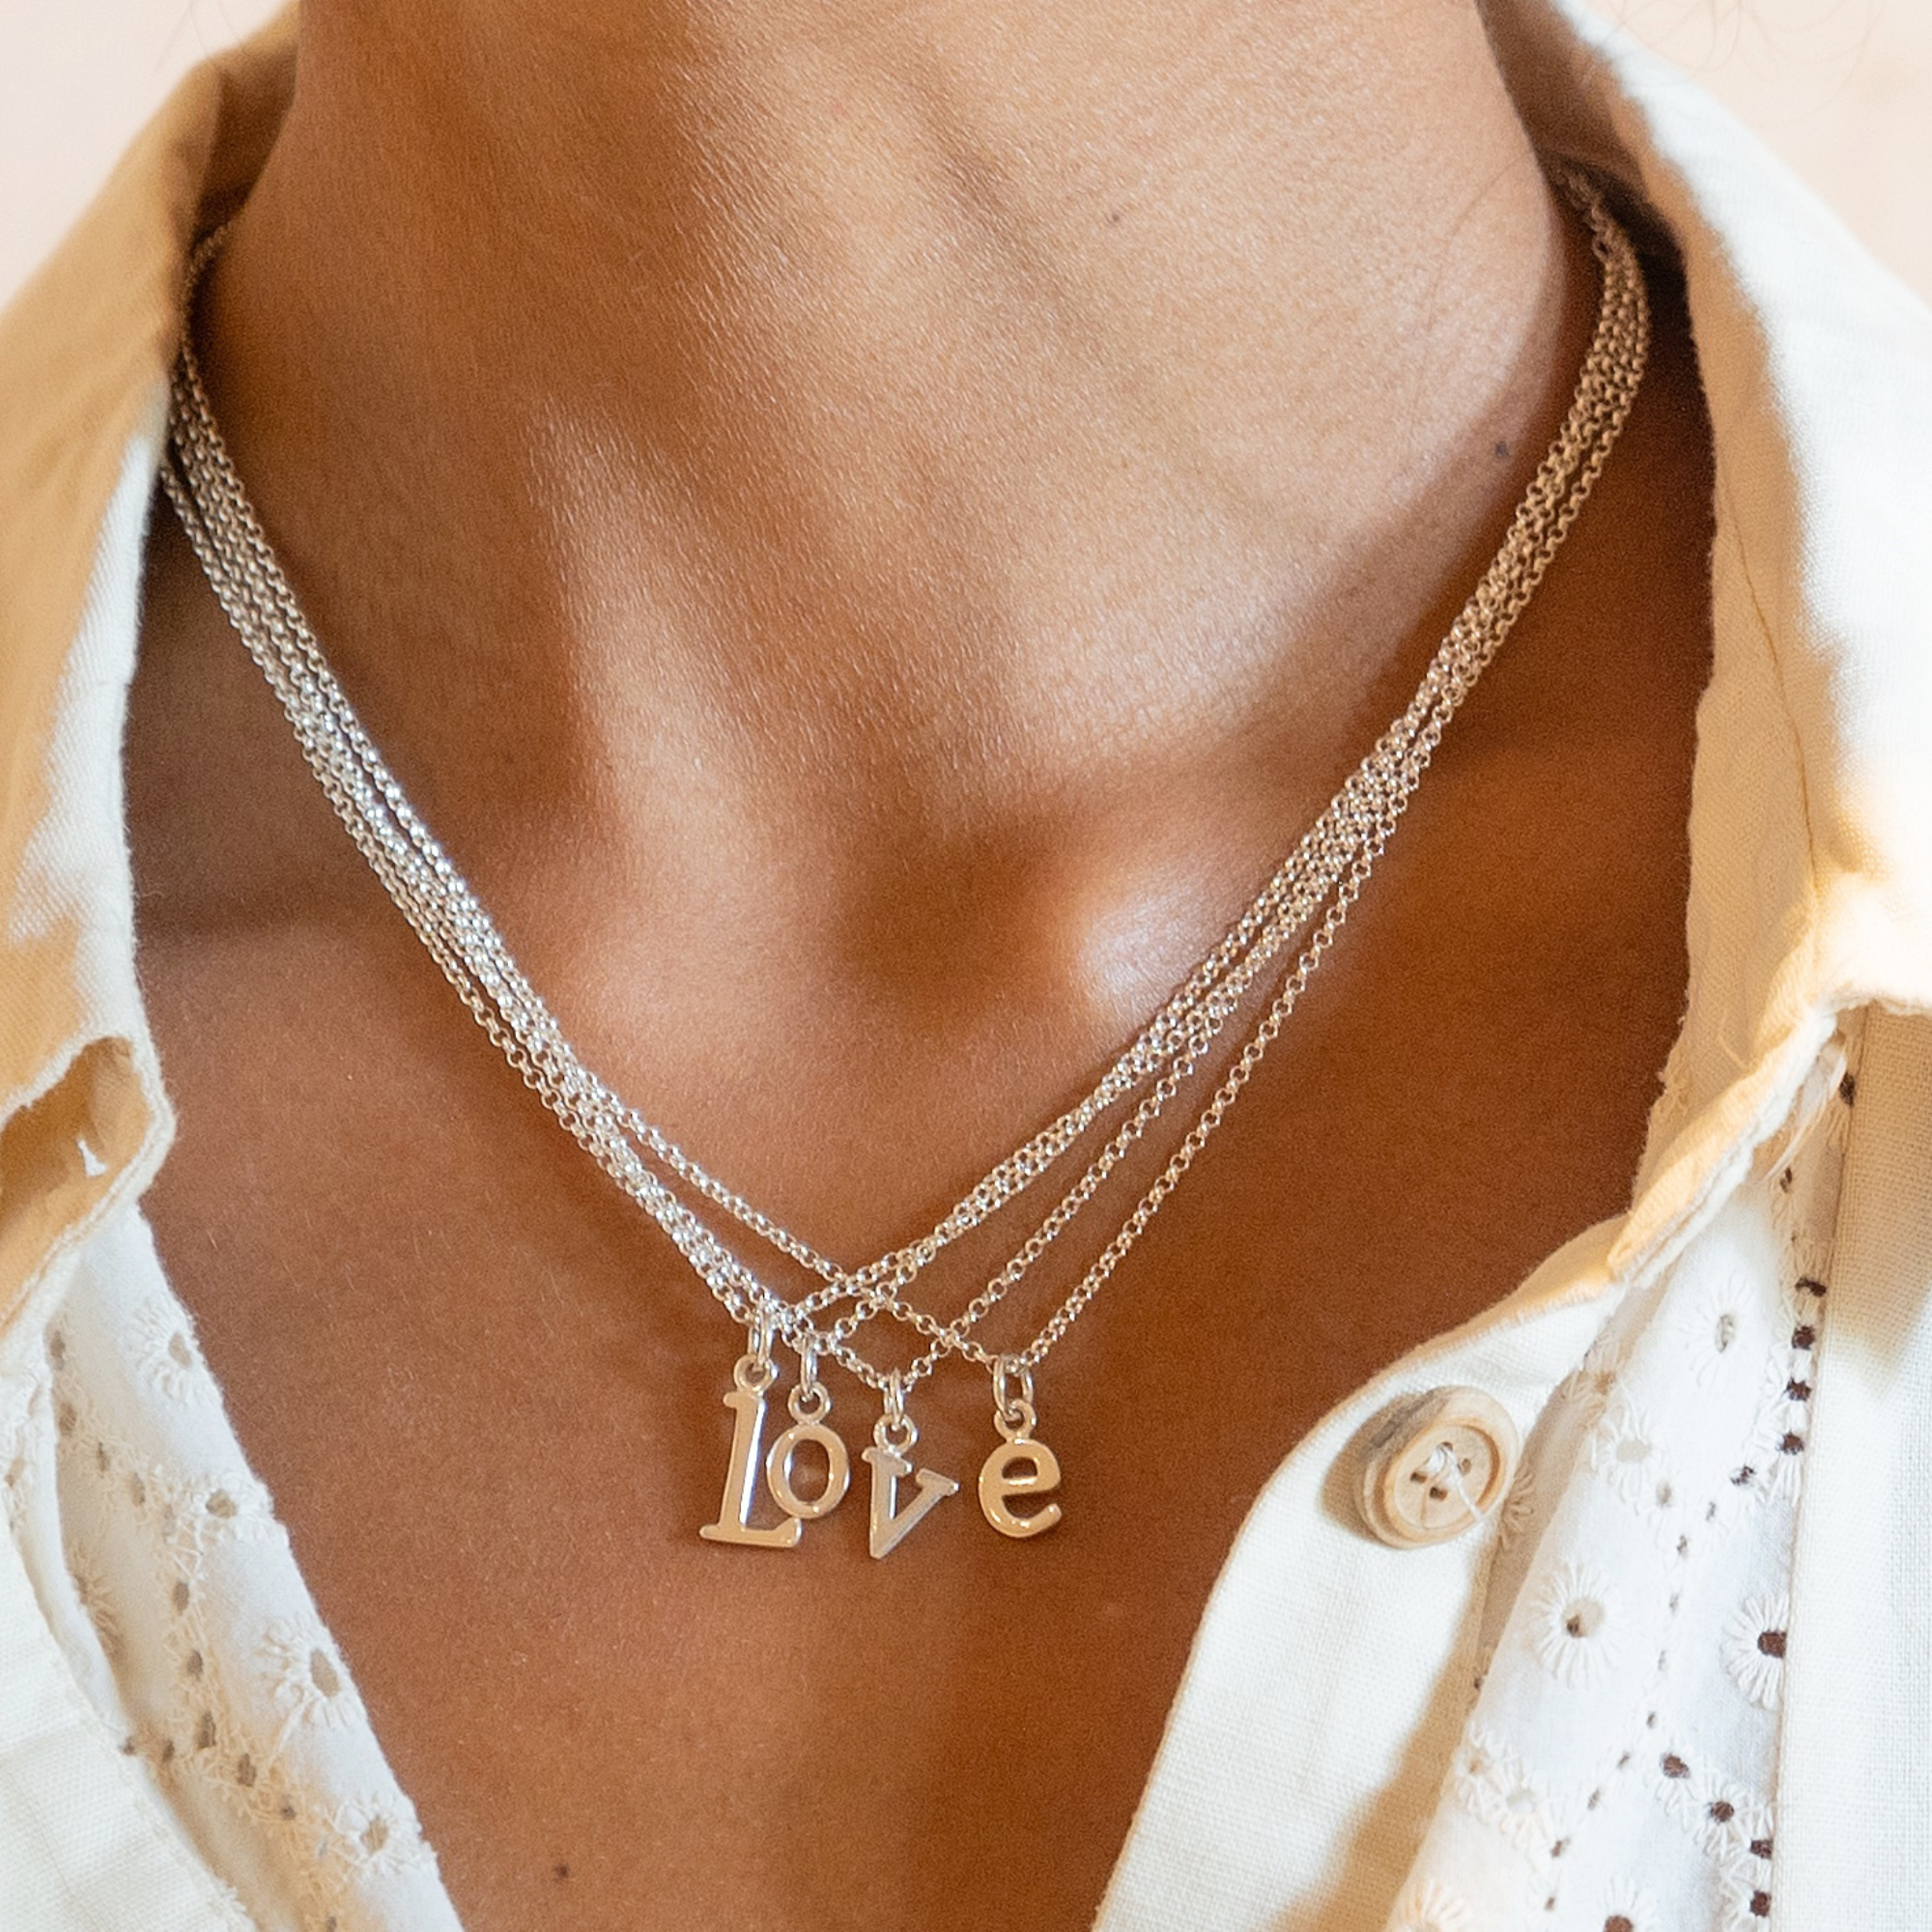 Love Necklace by Lily Charmed